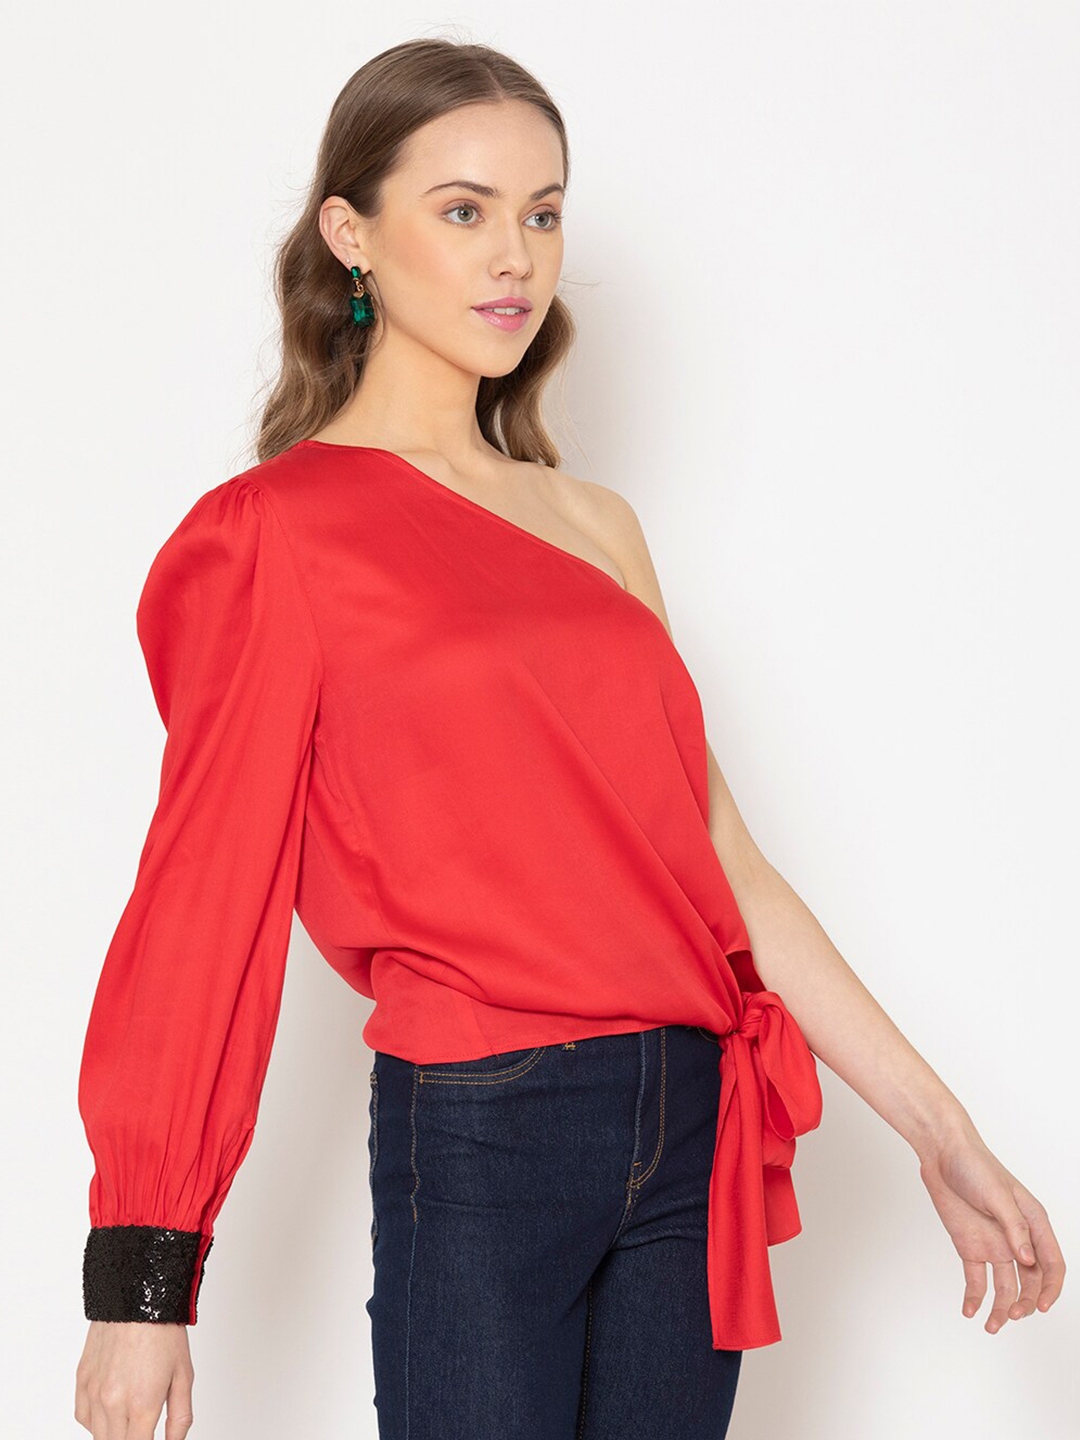 sparkly red one shoulder top